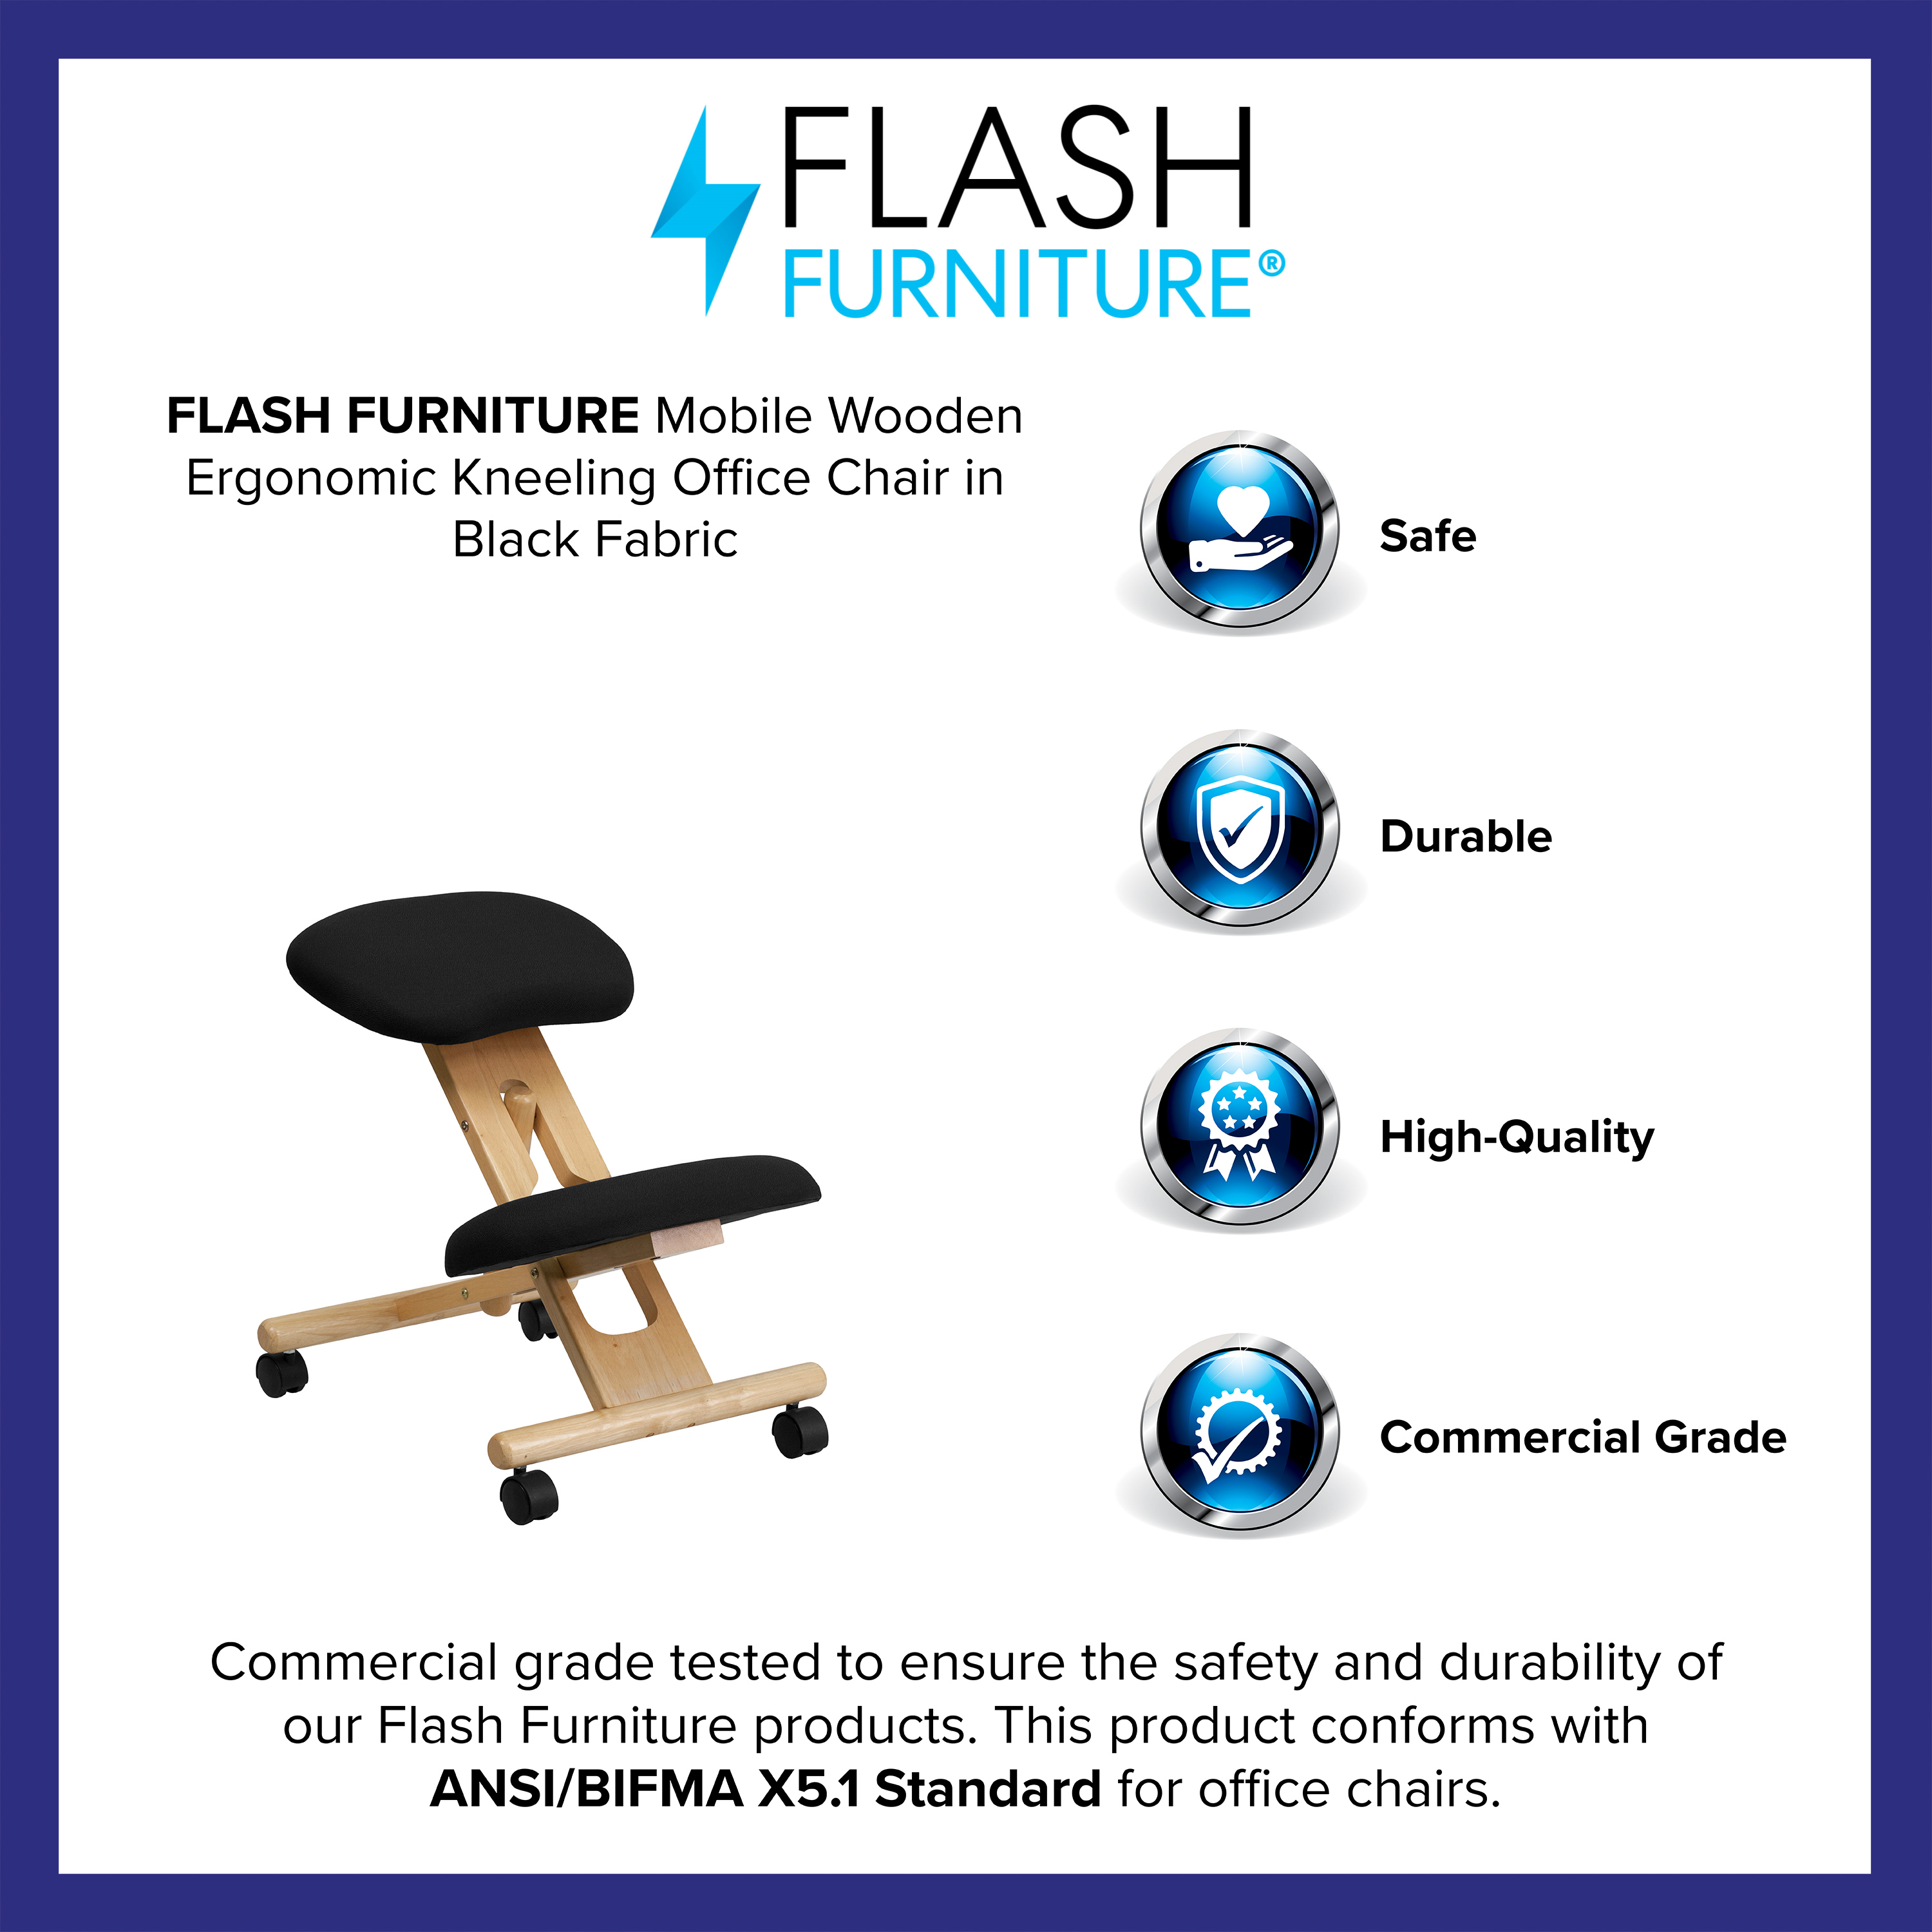 Flash Furniture Mobile Wooden Ergonomic Kneeling Office Chair in Black Fabric - image 4 of 13